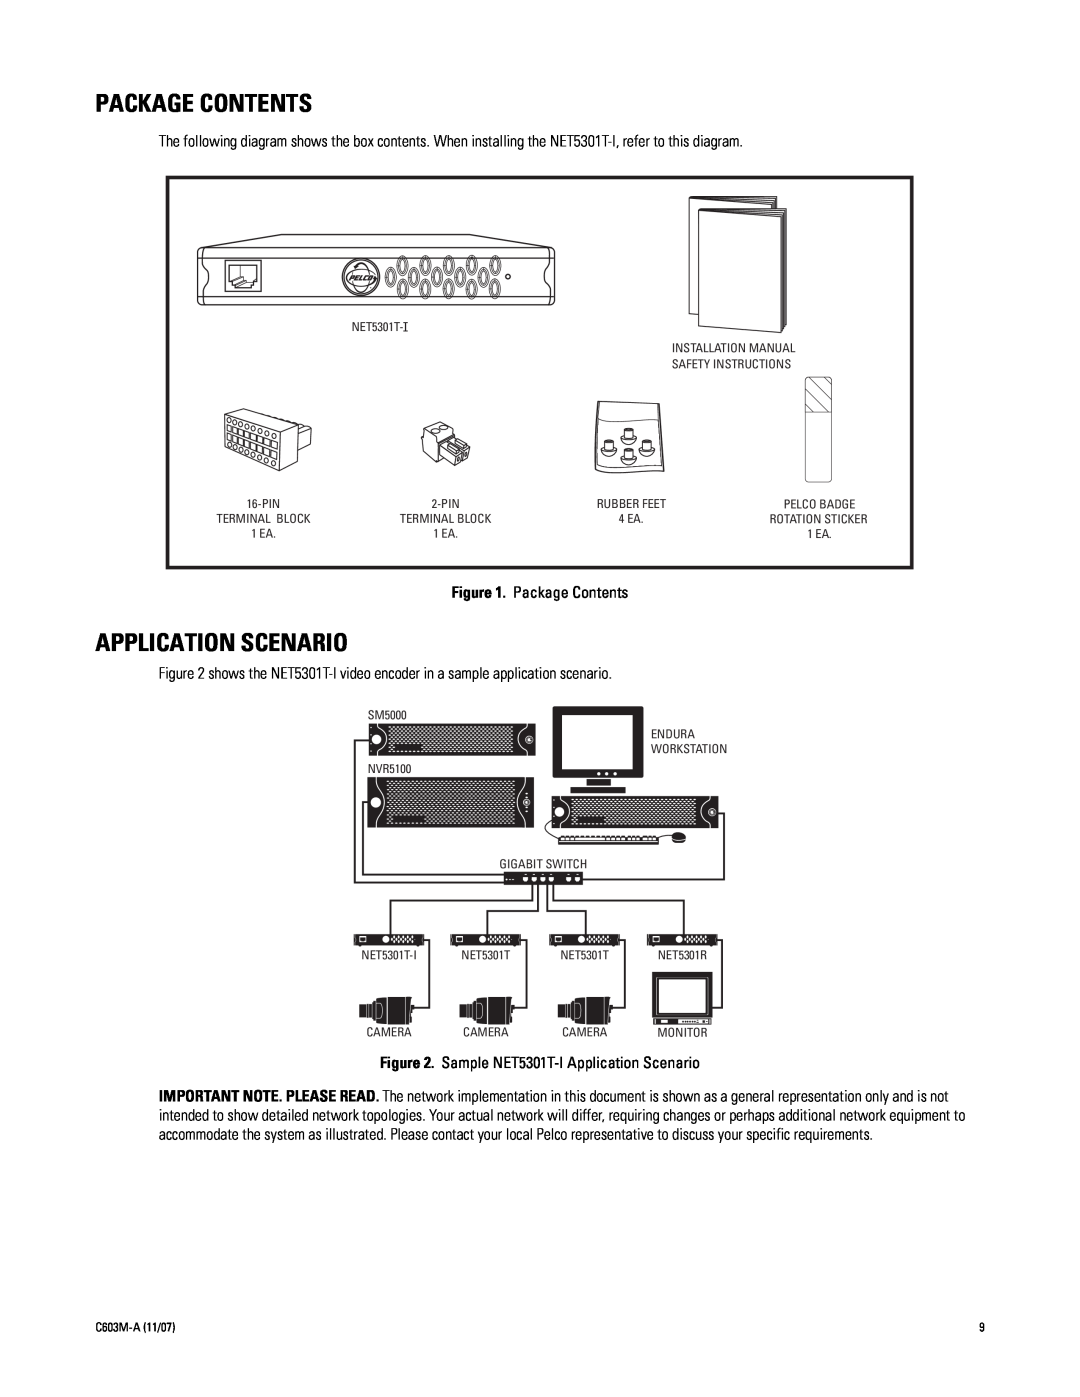 Pelco C603M-A (11/07) manual Package Contents, Sample NET5301T-I Application Scenario 